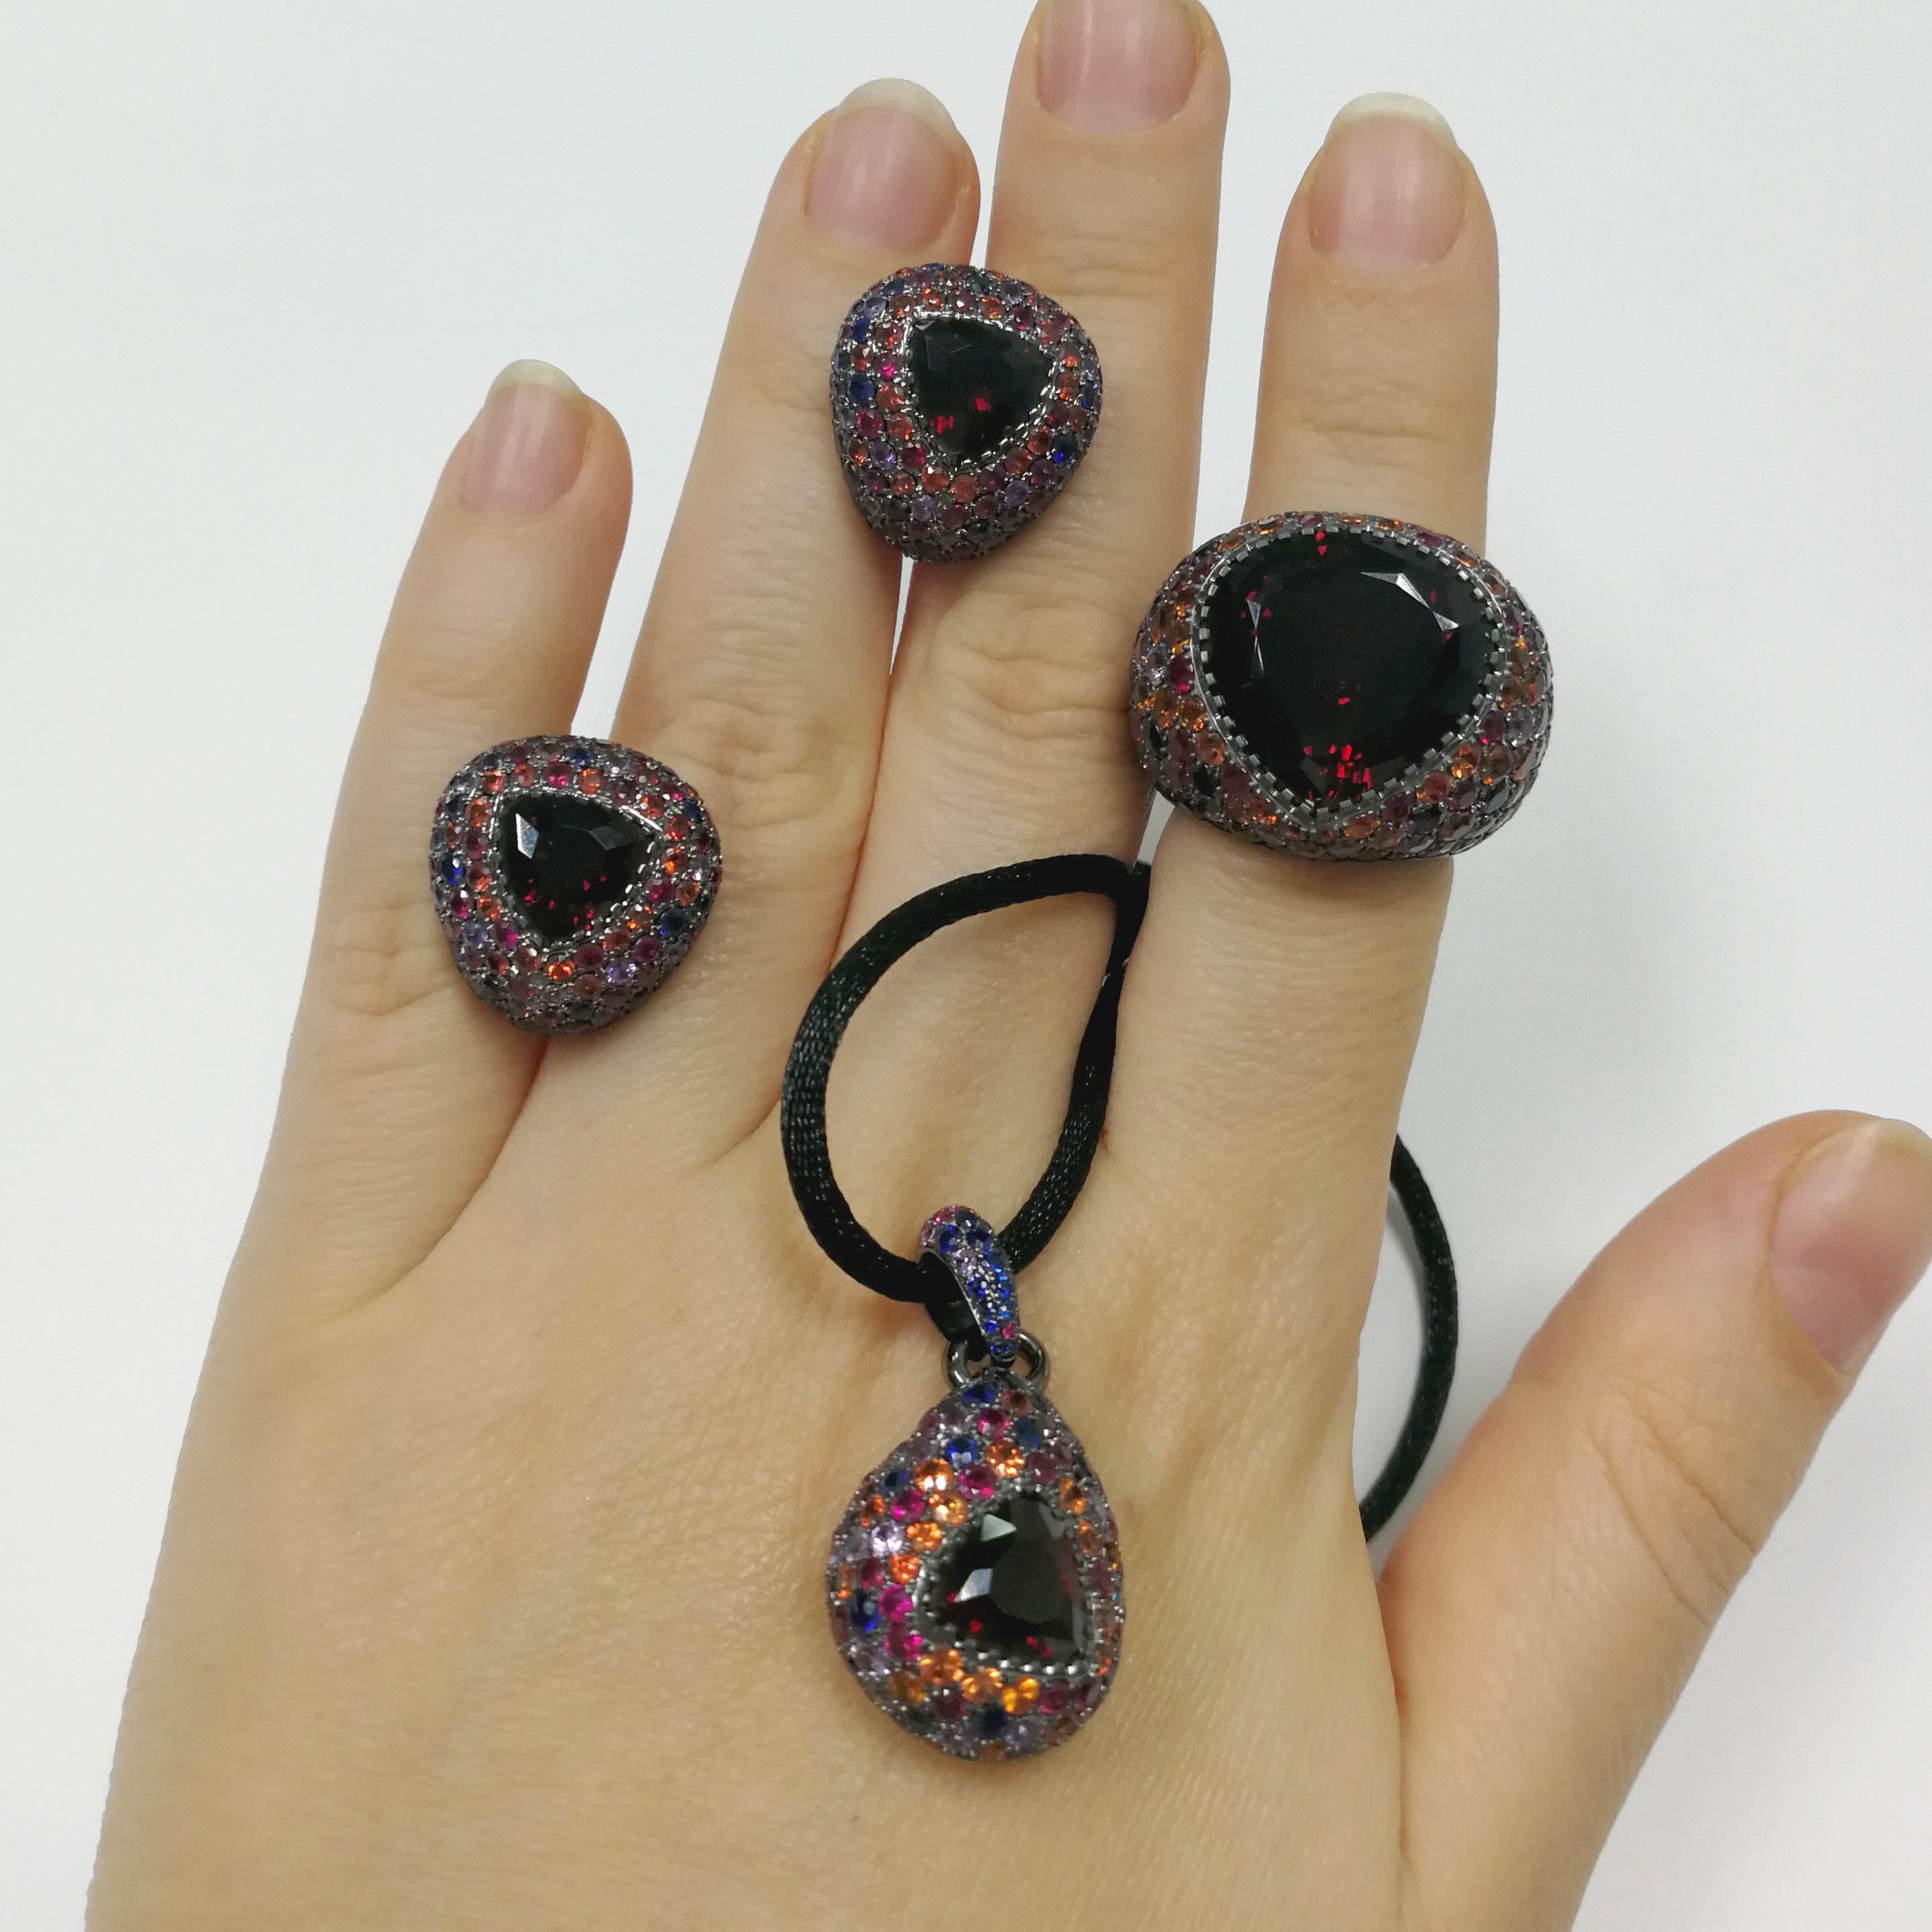 Garnet Sapphires Rubies Black 18 Karat Gold Riviera Suite
The name and the variety of colours in this collection are associated with the bright Italian and French Riviera, vivid and colourful houses and sun reflections on the water. A place where